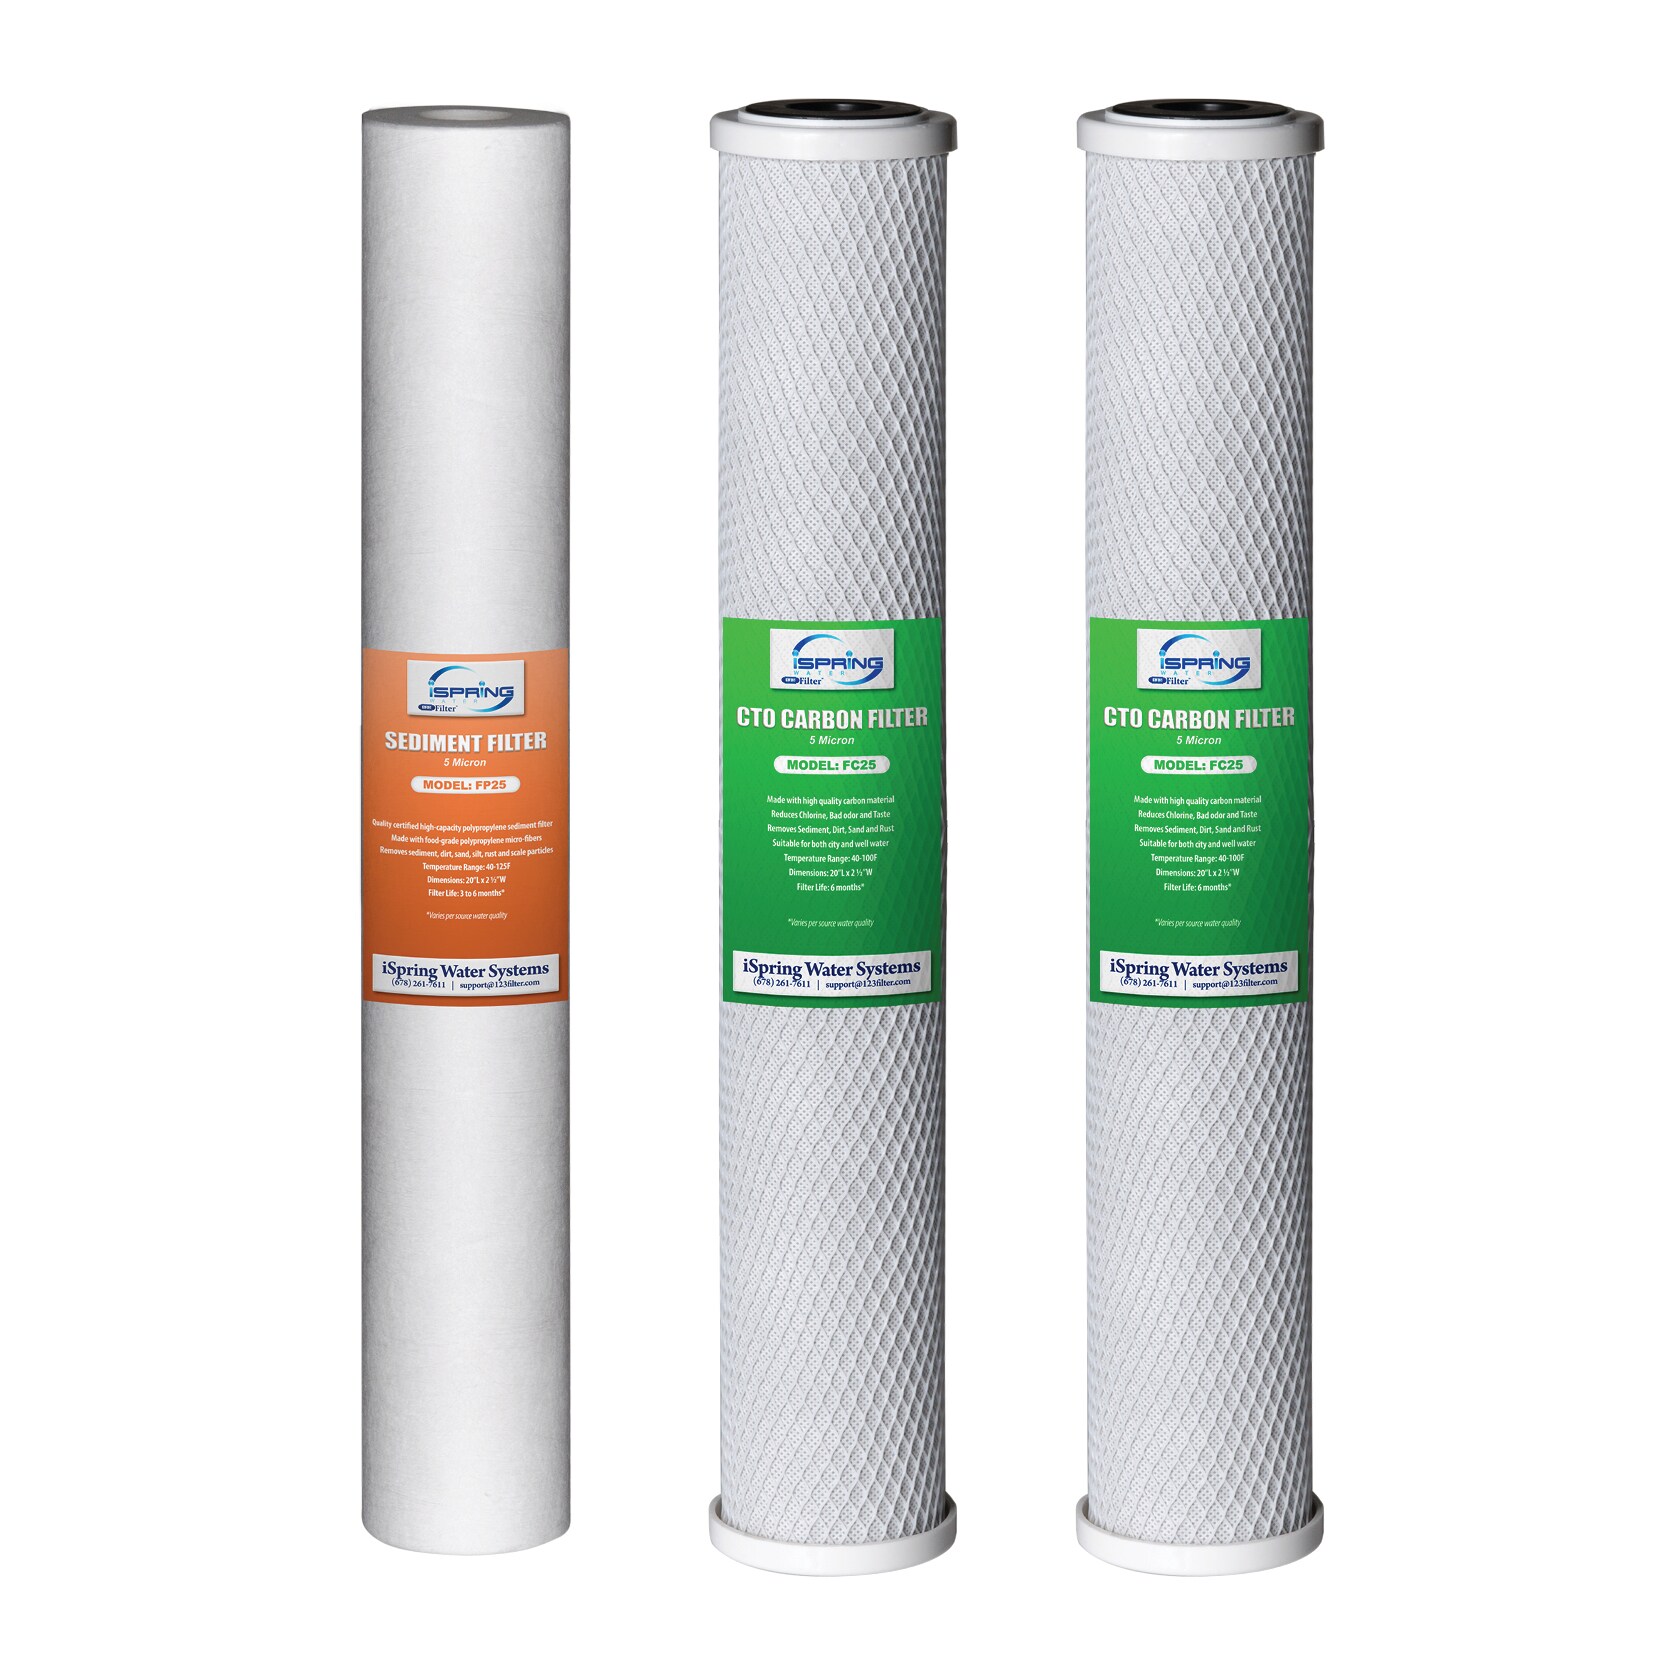 FILTER Sediment and 1-Micron Carbon Replacement for Whole House Water Filtration 3-Pack 